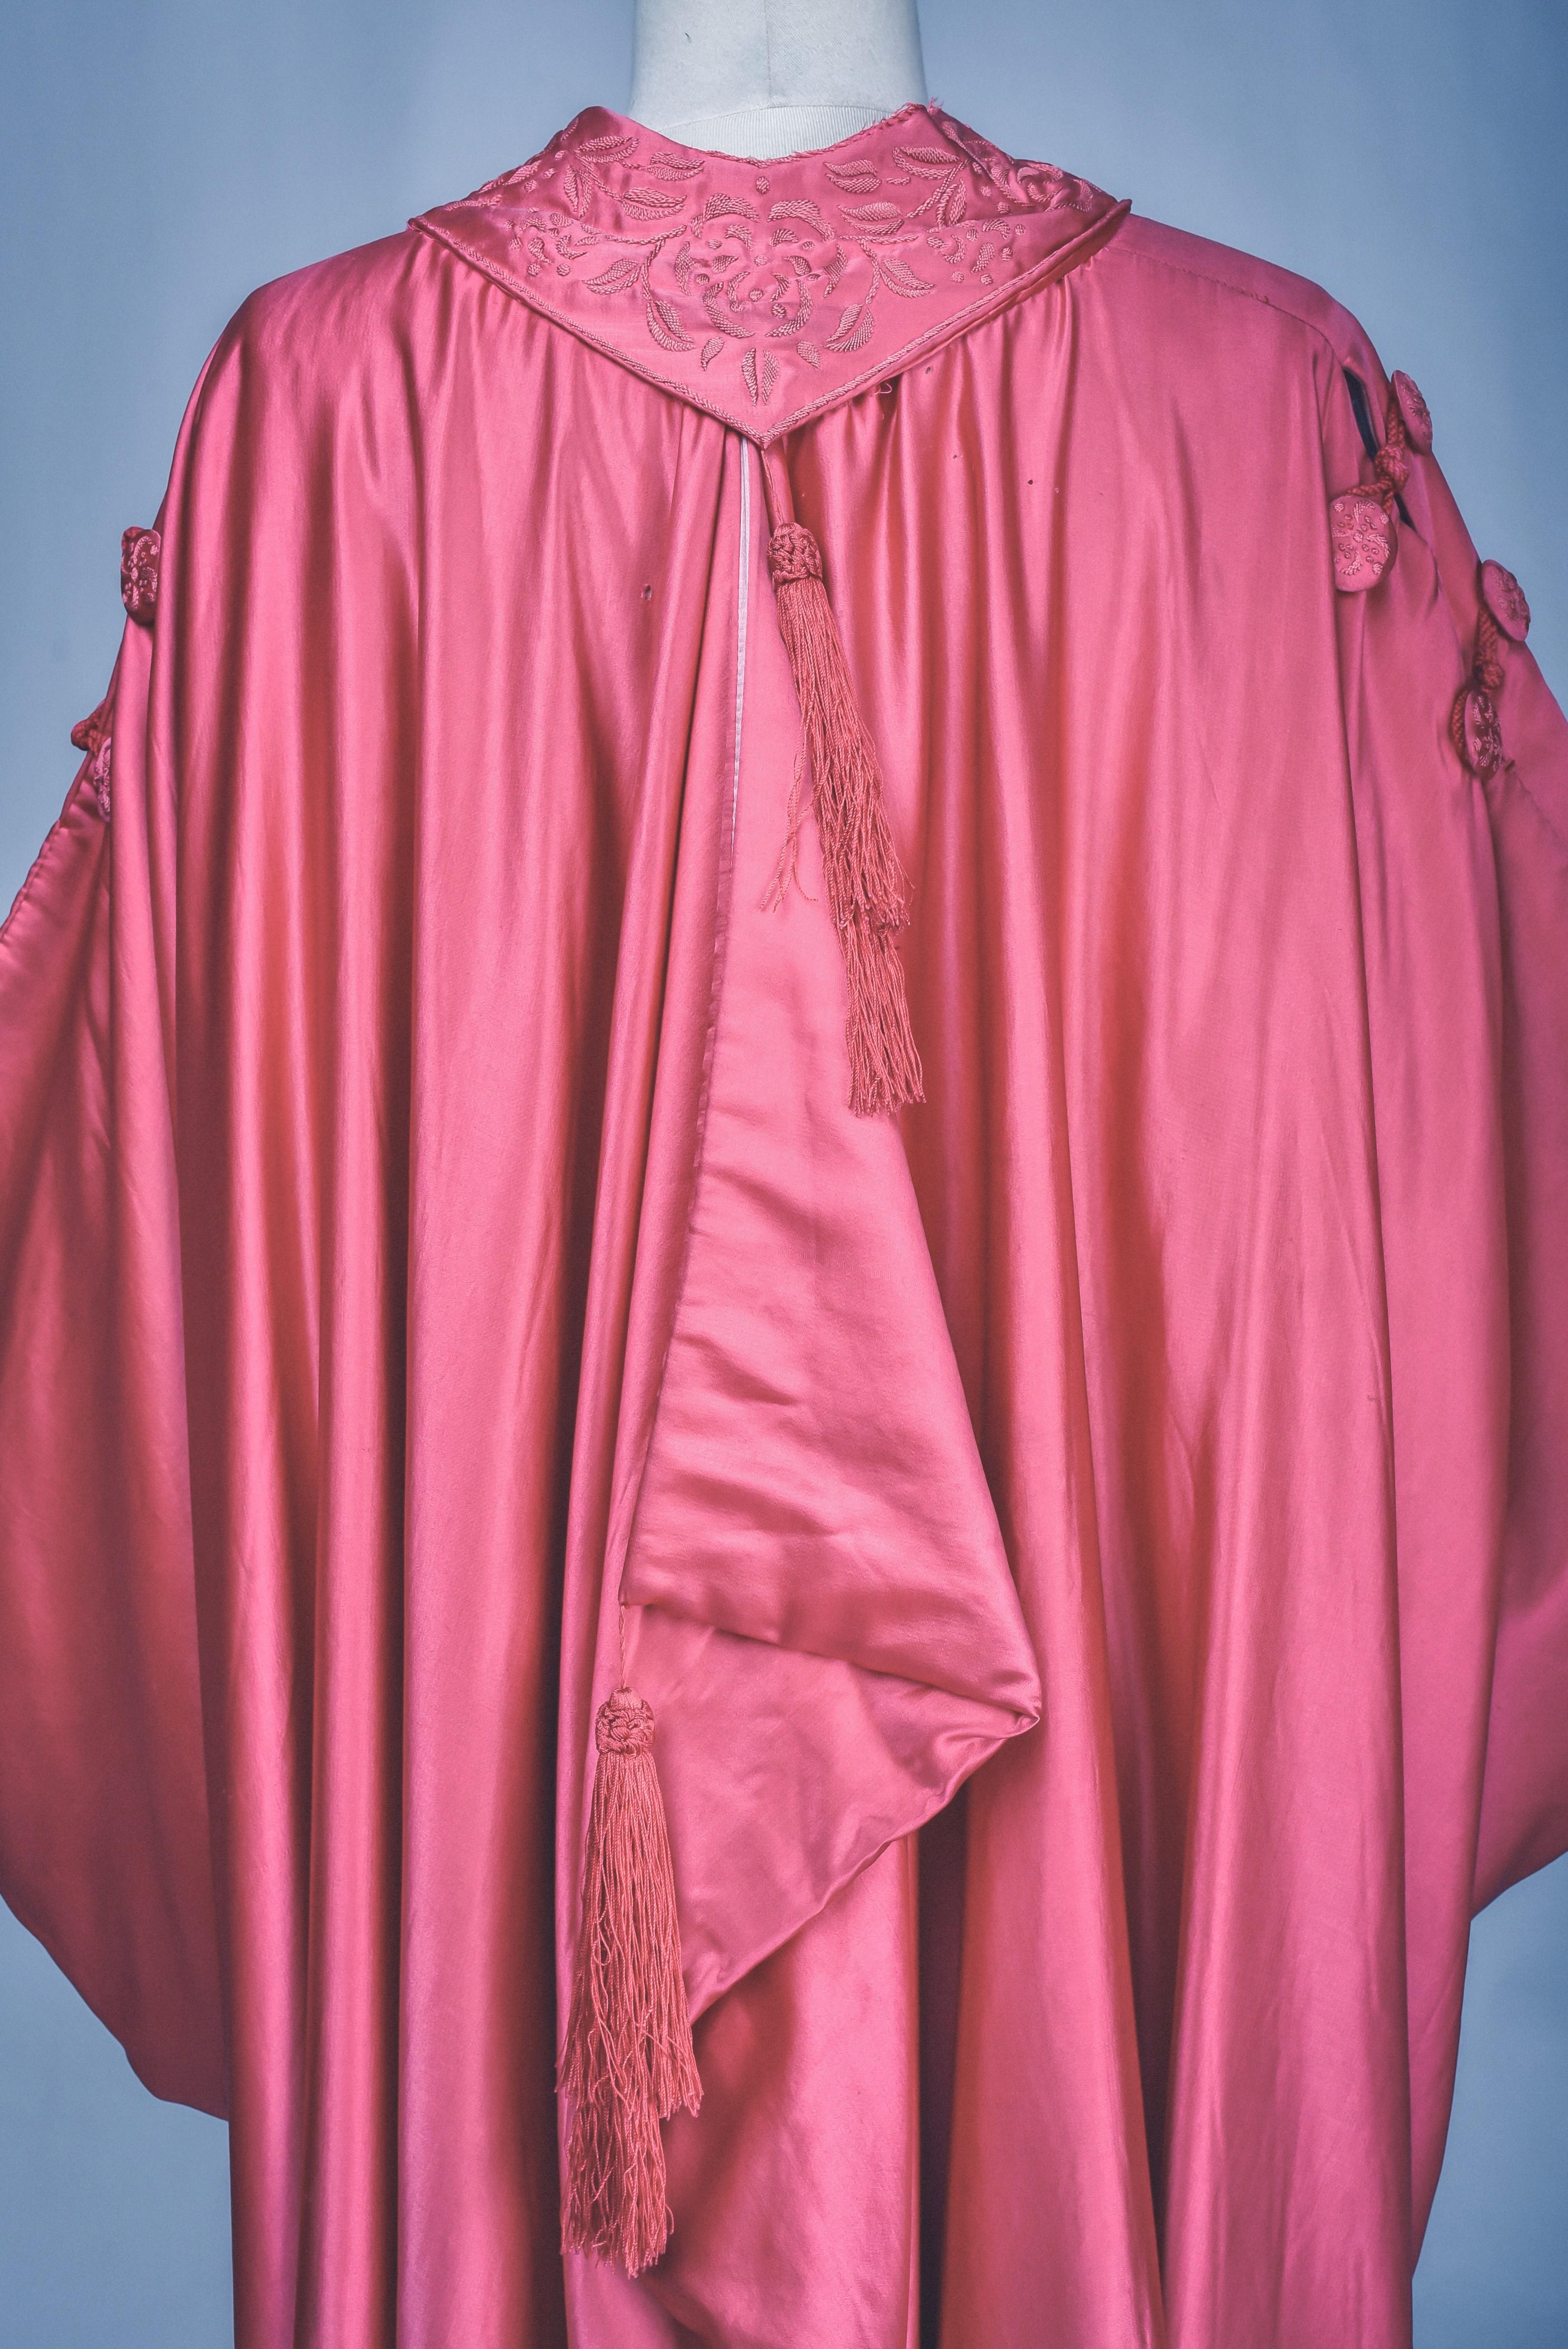 Fuschia Satin Evening Burnous By Liberty of London (Attributed to) Circa 1920 For Sale 3